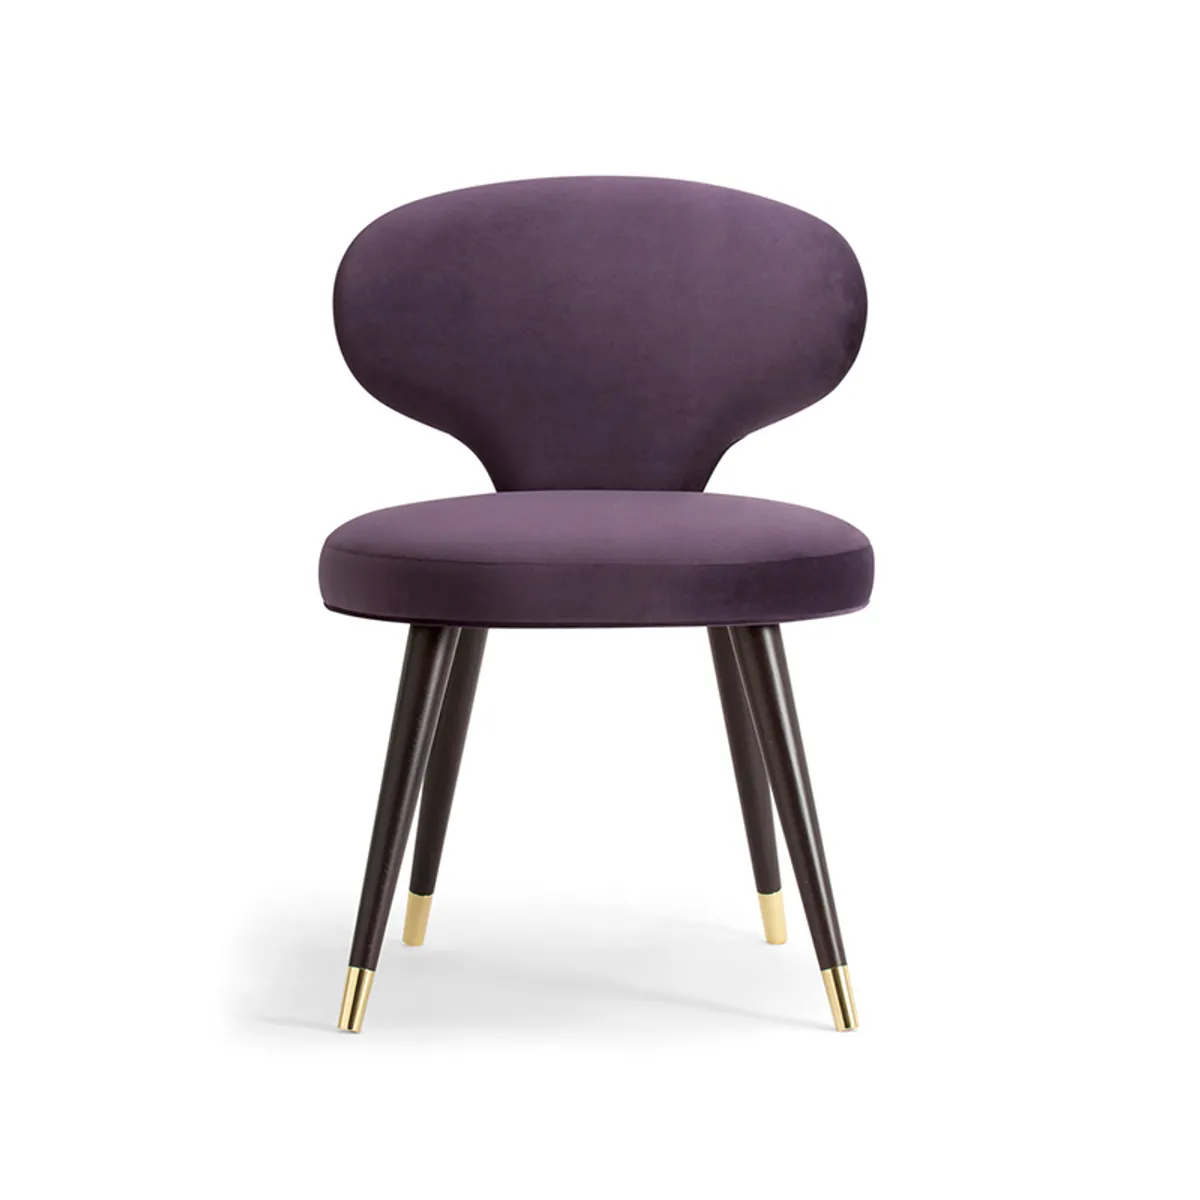 Sylvia Side Chair Purple Upholstery And Wooden Legs Hotel Furniture By Insideoutcontracts78